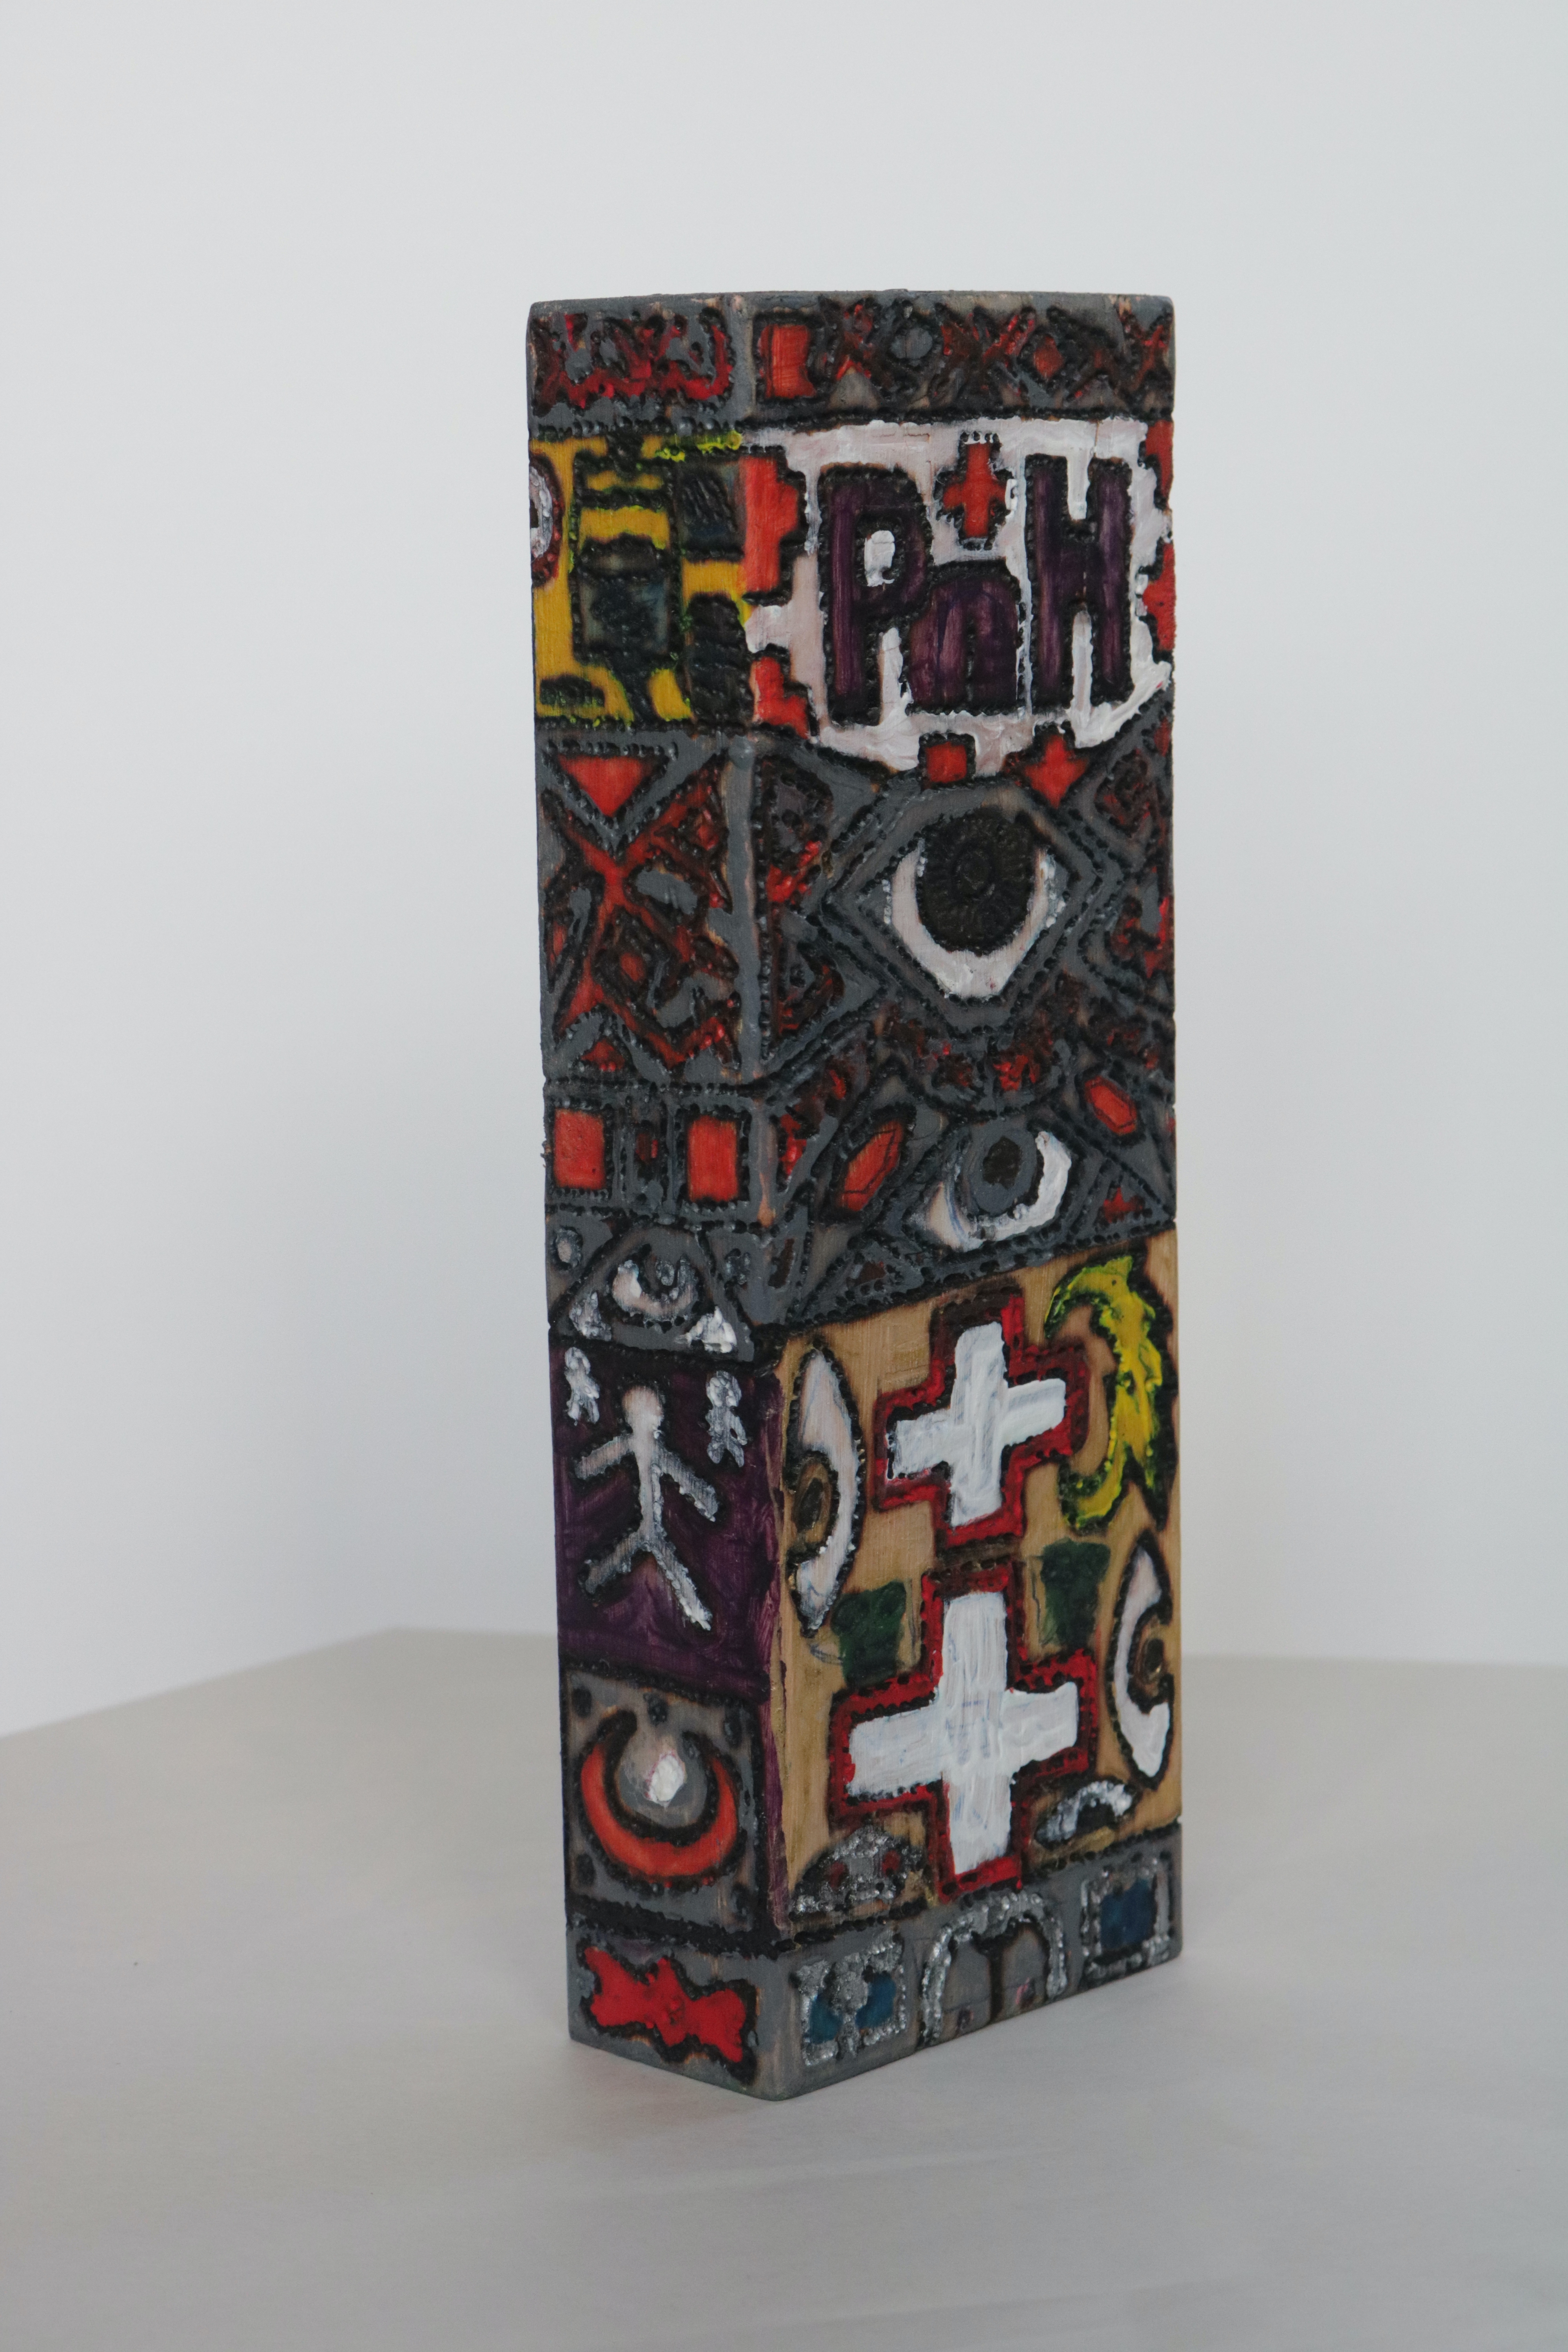 A slim, tall, wooden block. The letters P n H burnt in and painted. There are crescents, crosses, and eyes, burnt throughout the cluttered patterns.